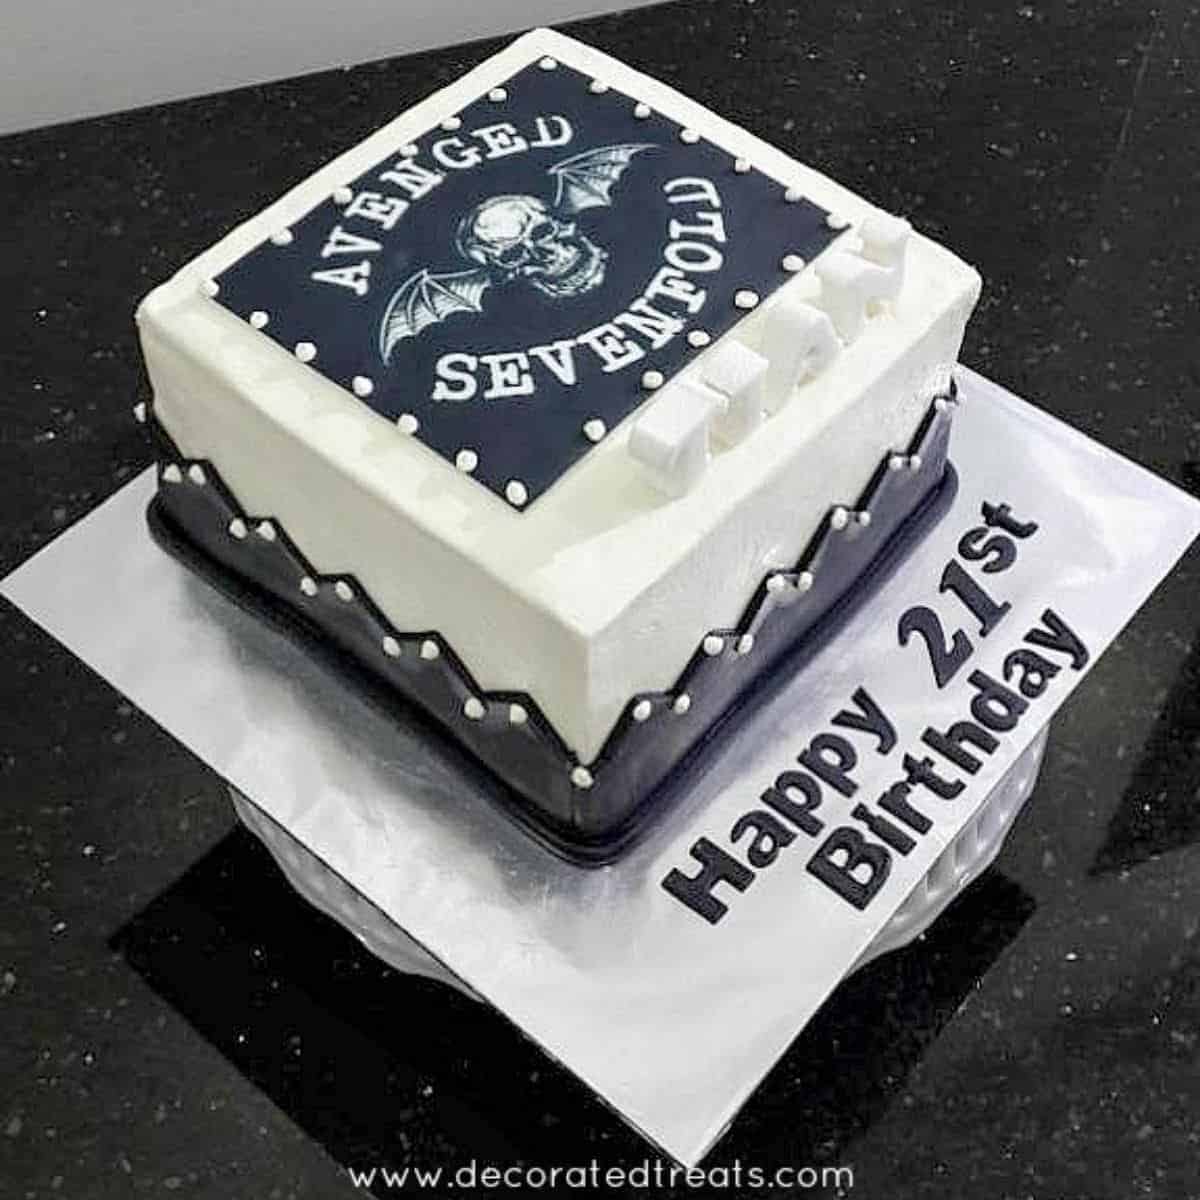 A square white cake decorated with Avenged Sevenfold image in black.